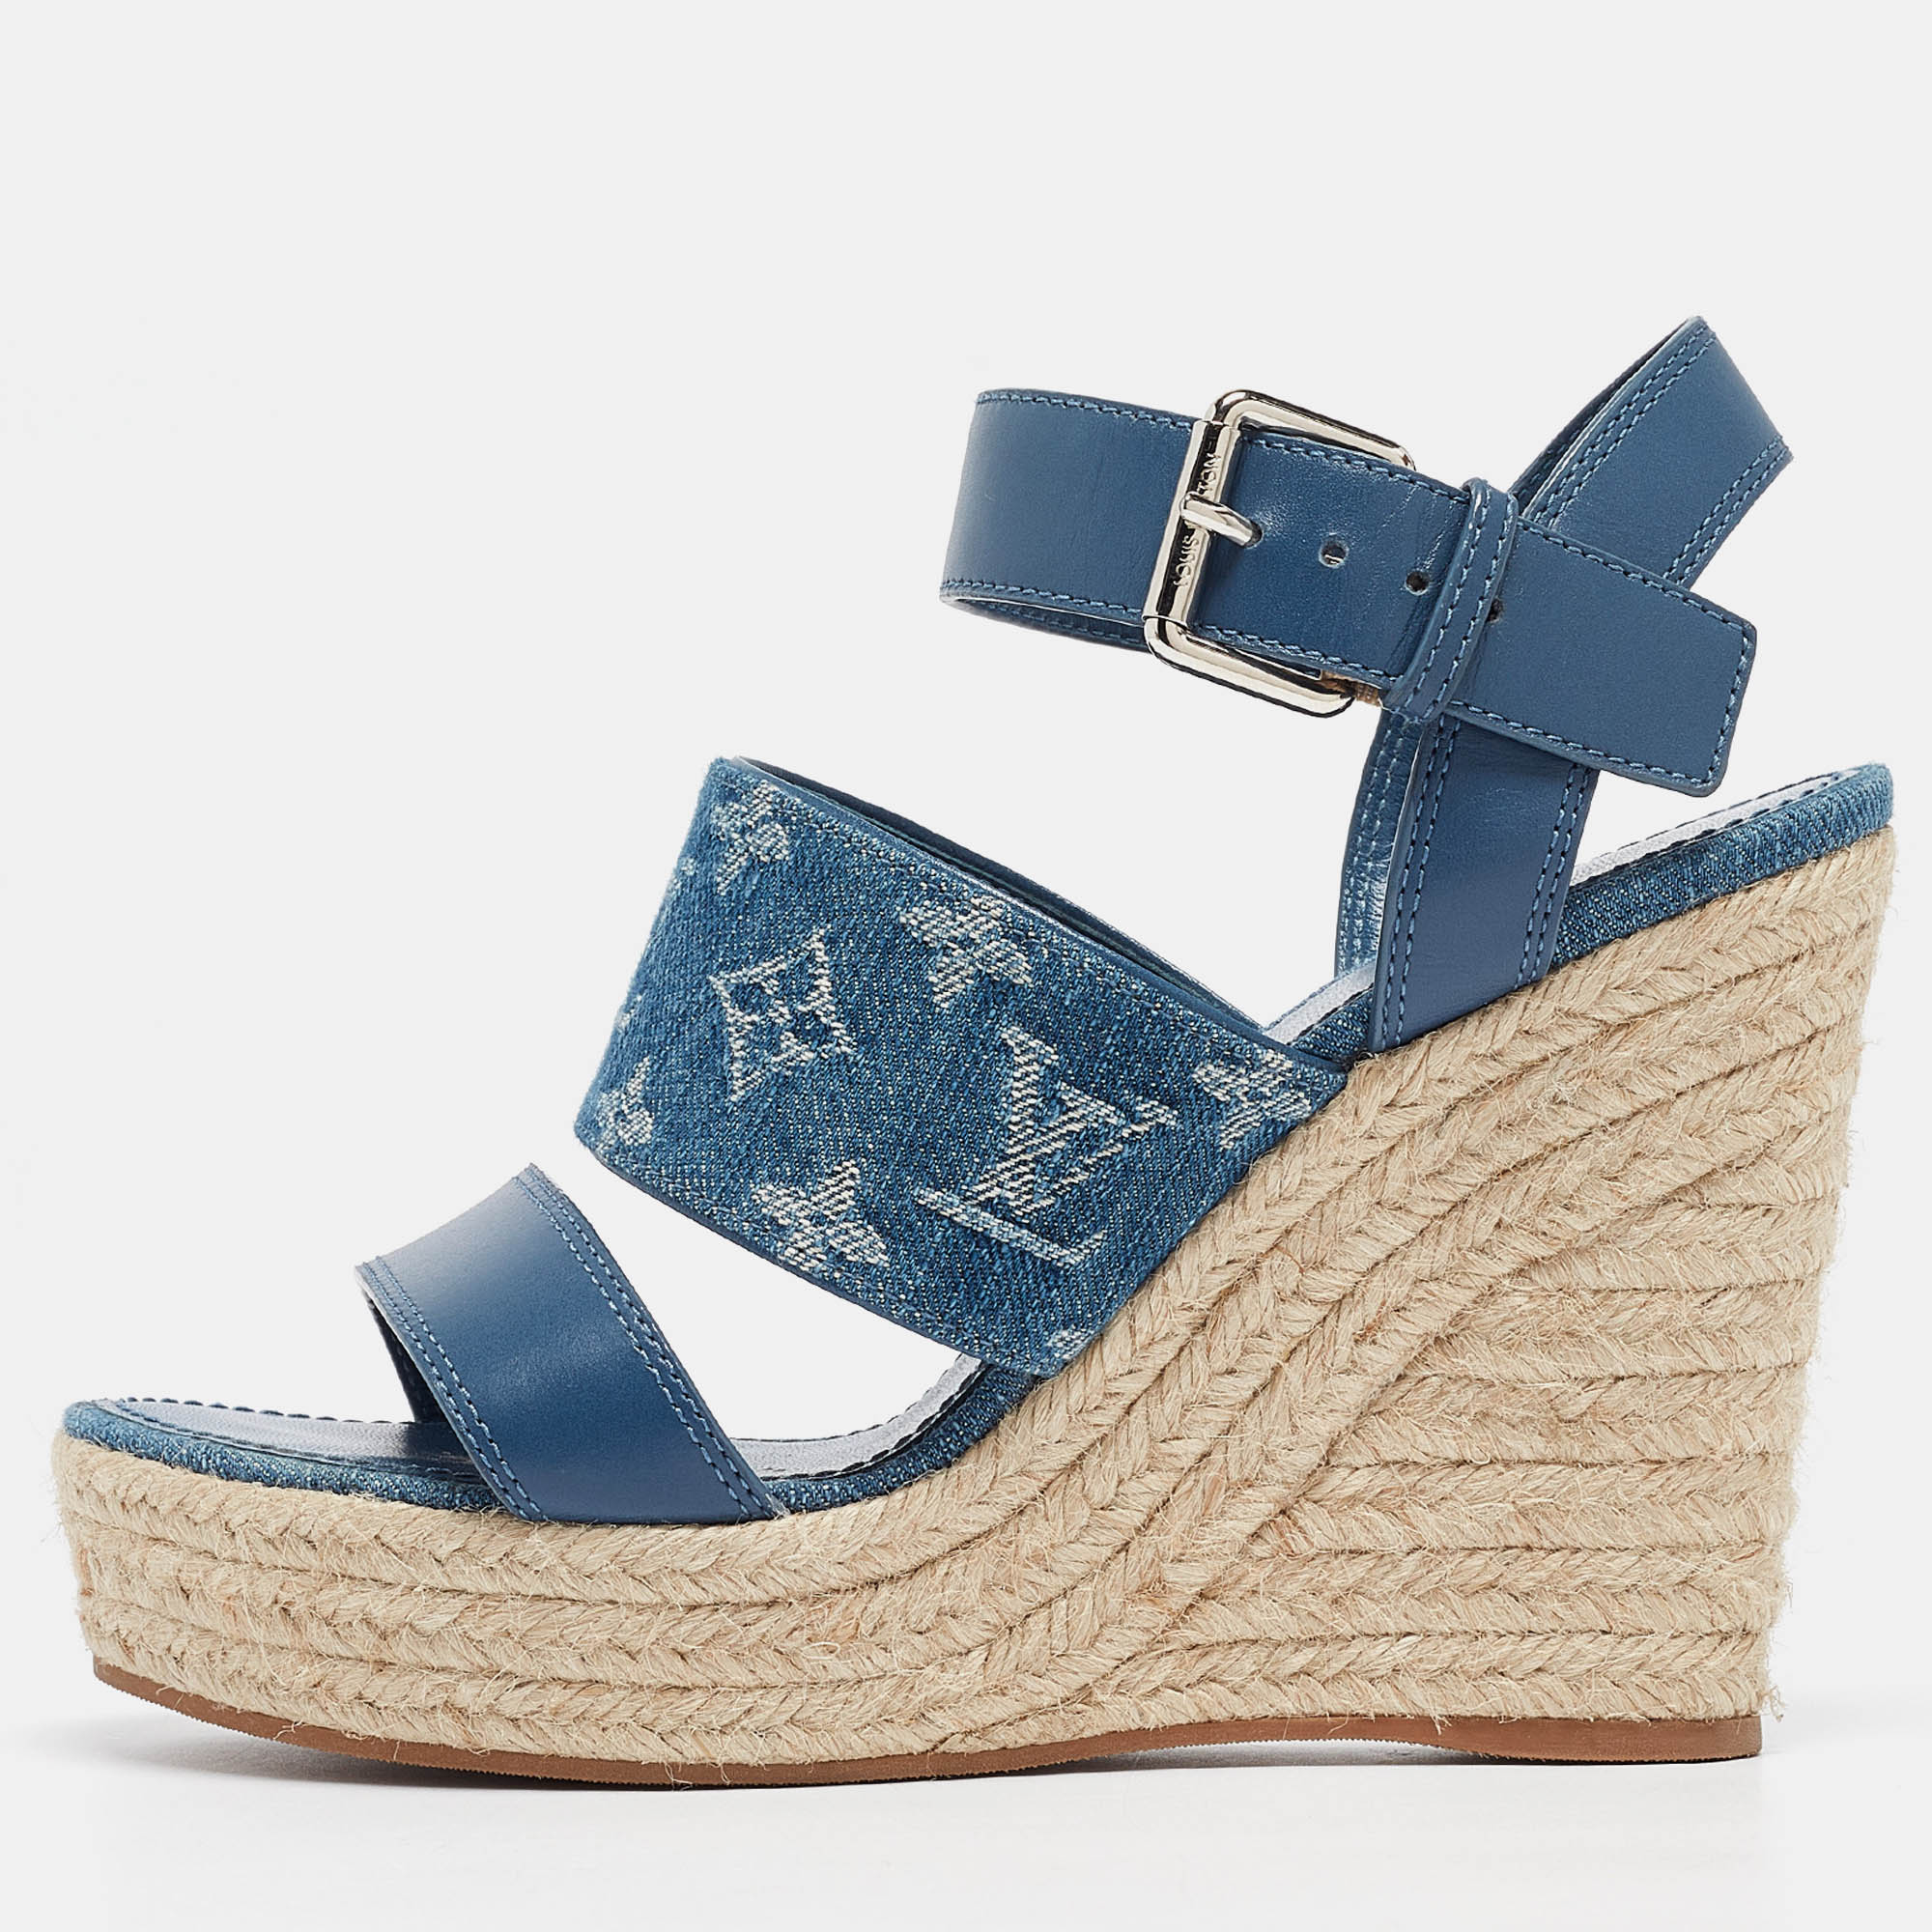 Louis vuitton blue leather and monogram denim starboard wedge sandals size 38